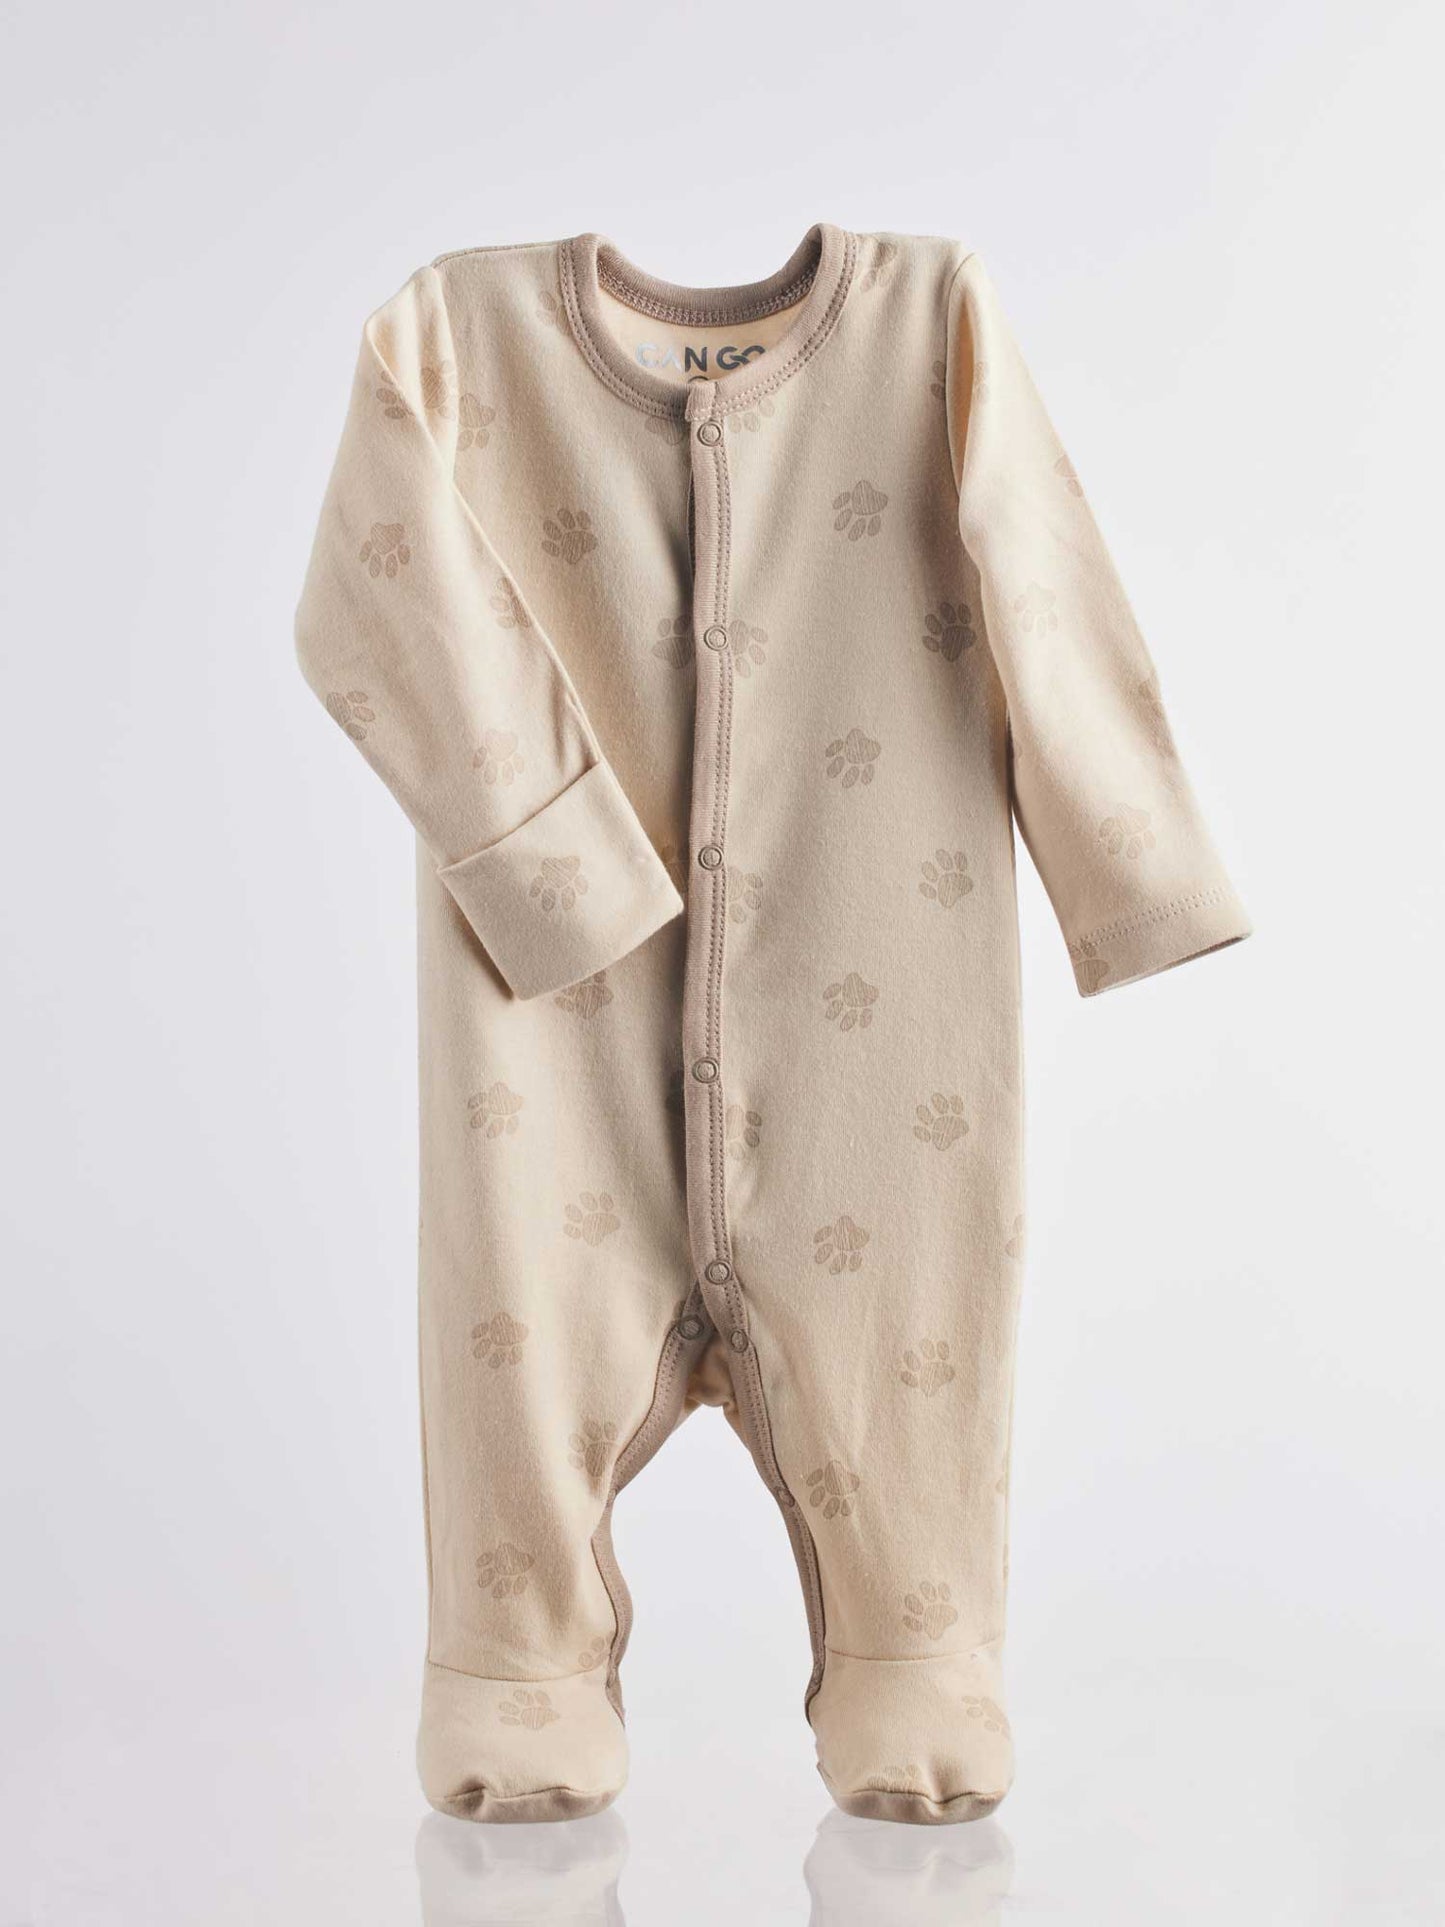 Infant Overall Bear & Bunny 376 is an adorable baby bodysuit featuring cute bear and bunny footprints on the front. It has long sleeves and comes in sizes 0-12 months. These cotton one-piece overalls are made from our authentically created material design, perfectly suitable for both outerwear and nightwear. This model is between the most popular ones that are worn by even the most youngest.